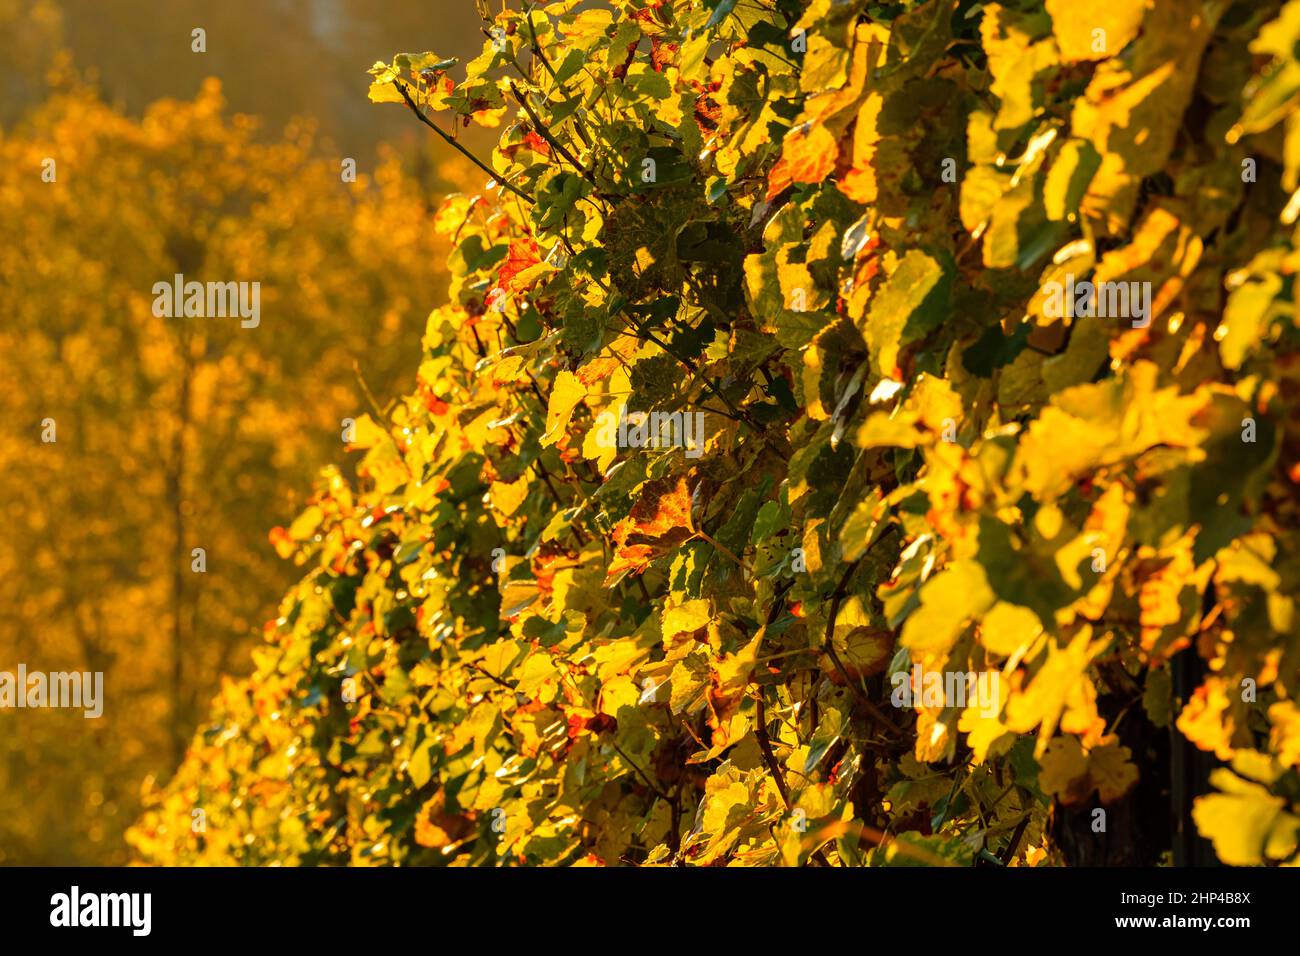 Yellow vine leaves in a vineyard close-up scene Stock Photo